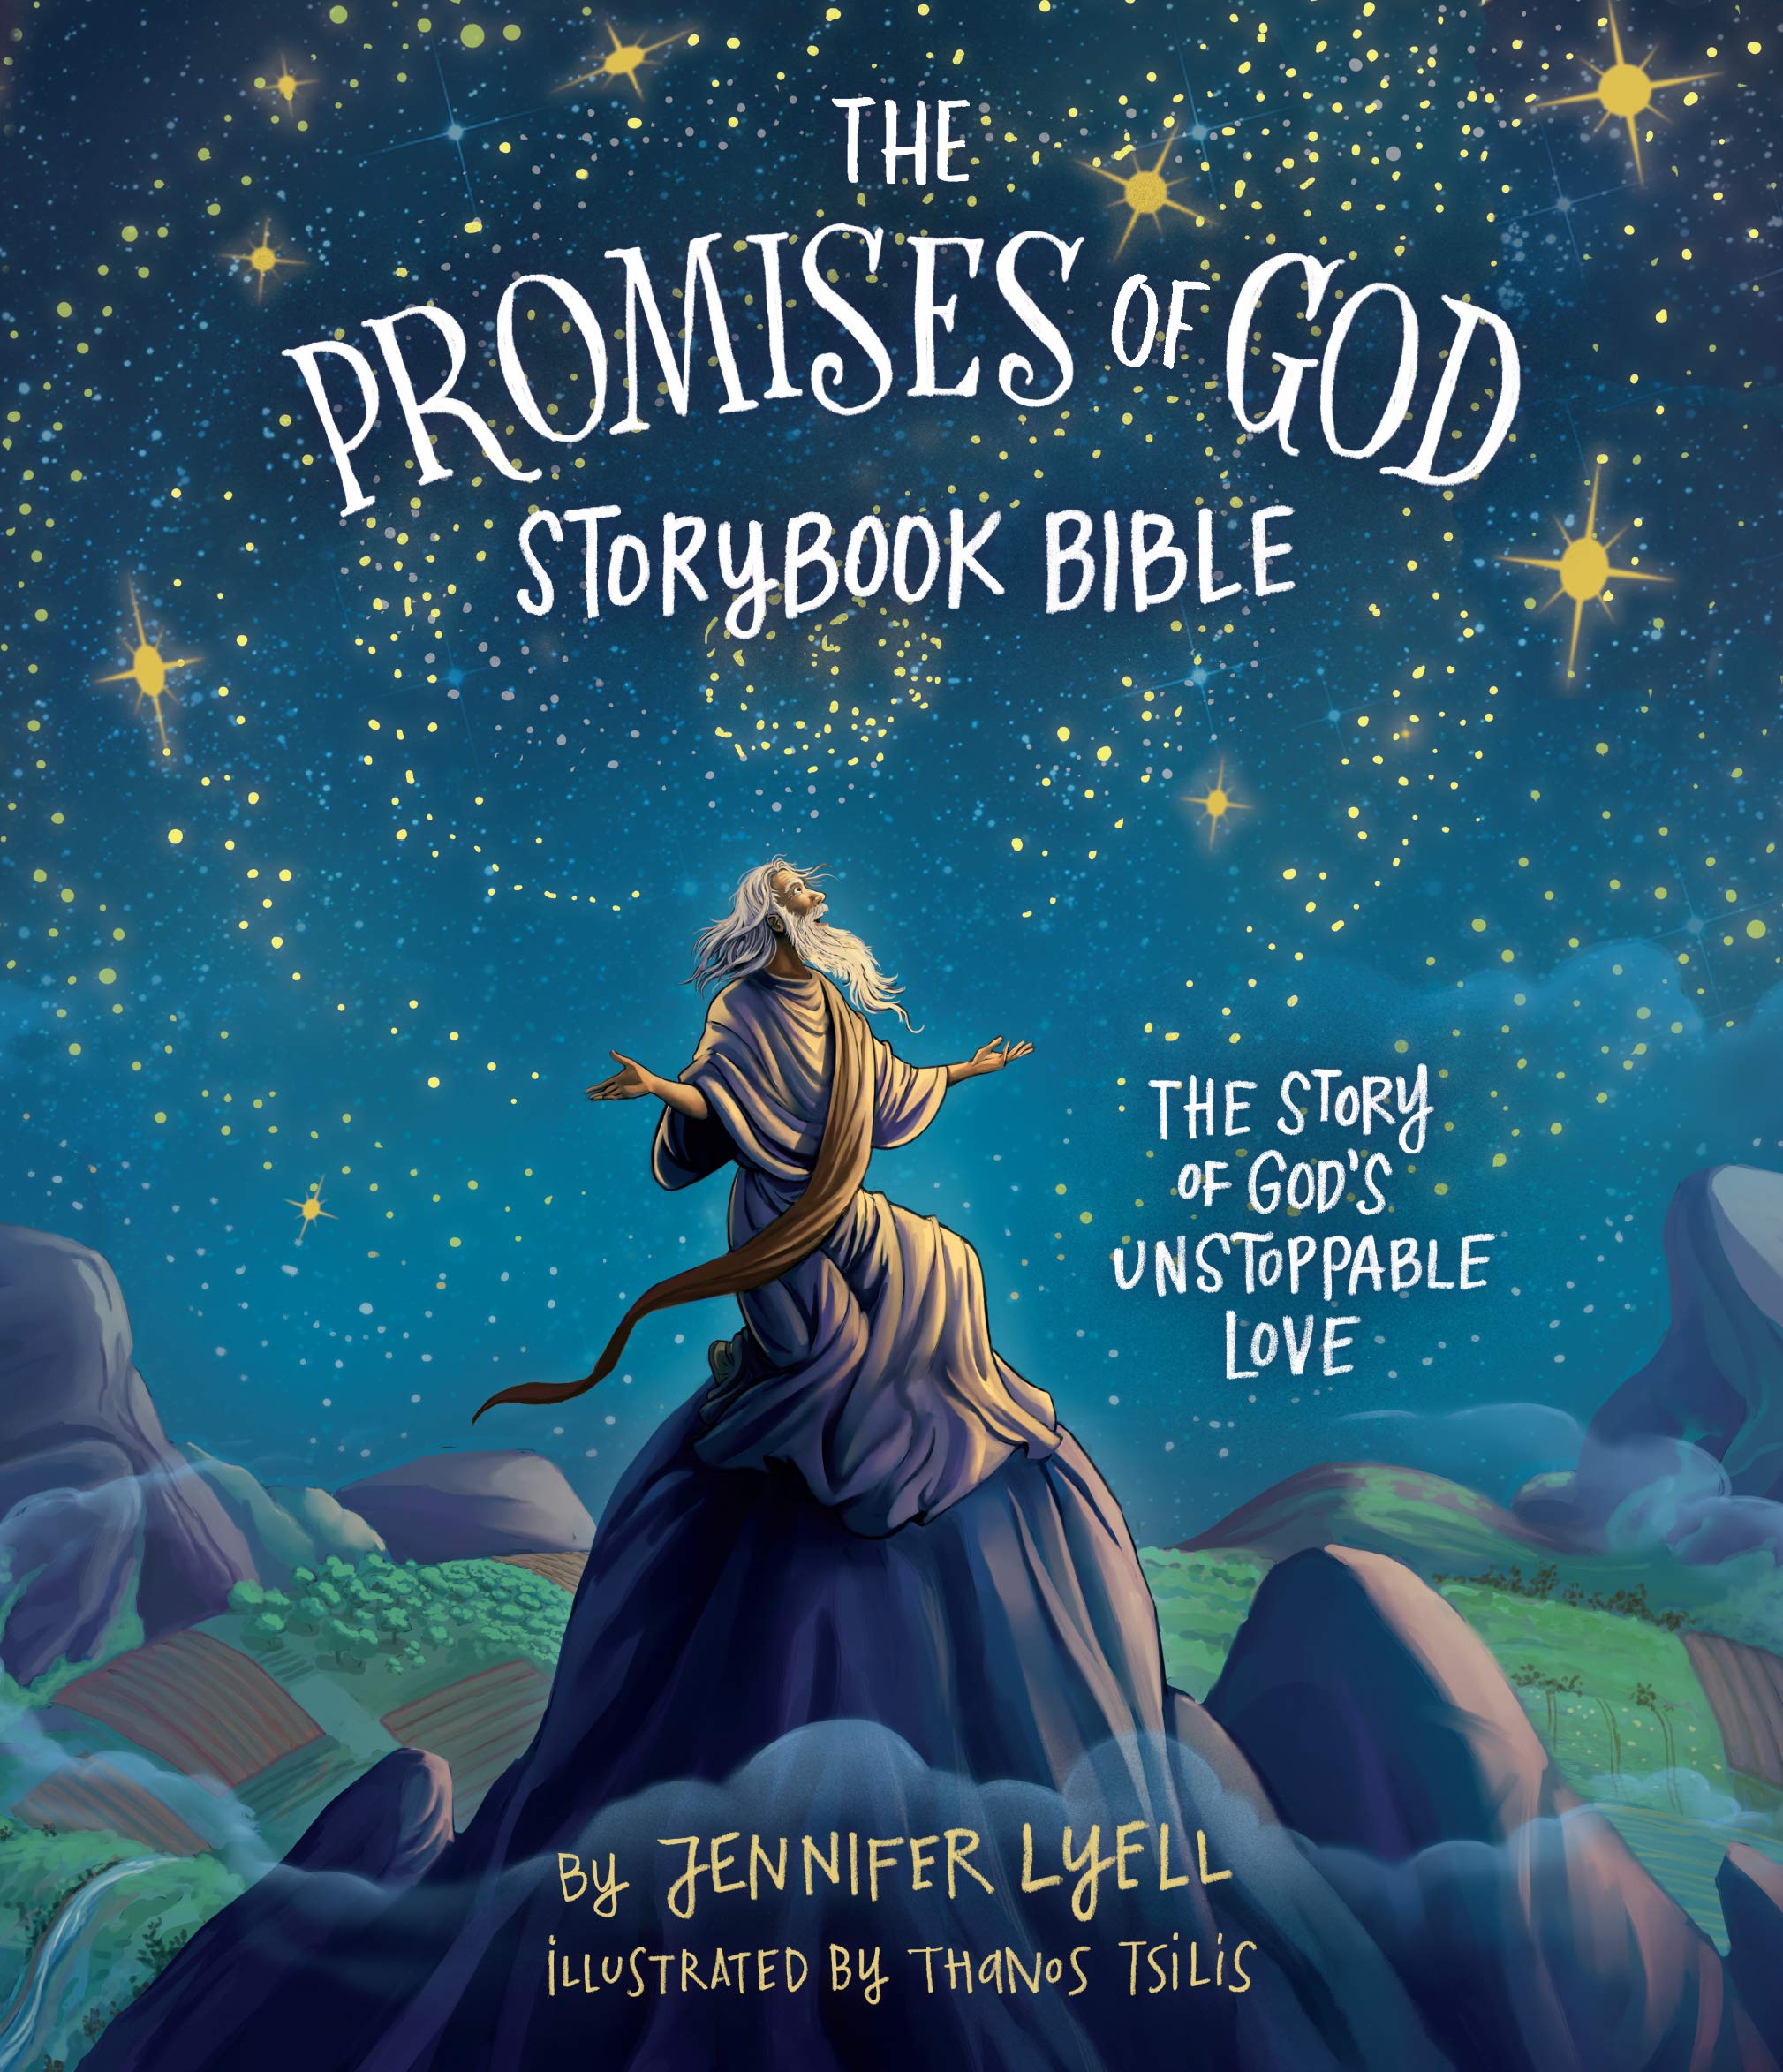 Promises of God Storybook Bible (The) - The Story of God's Unstoppable Love